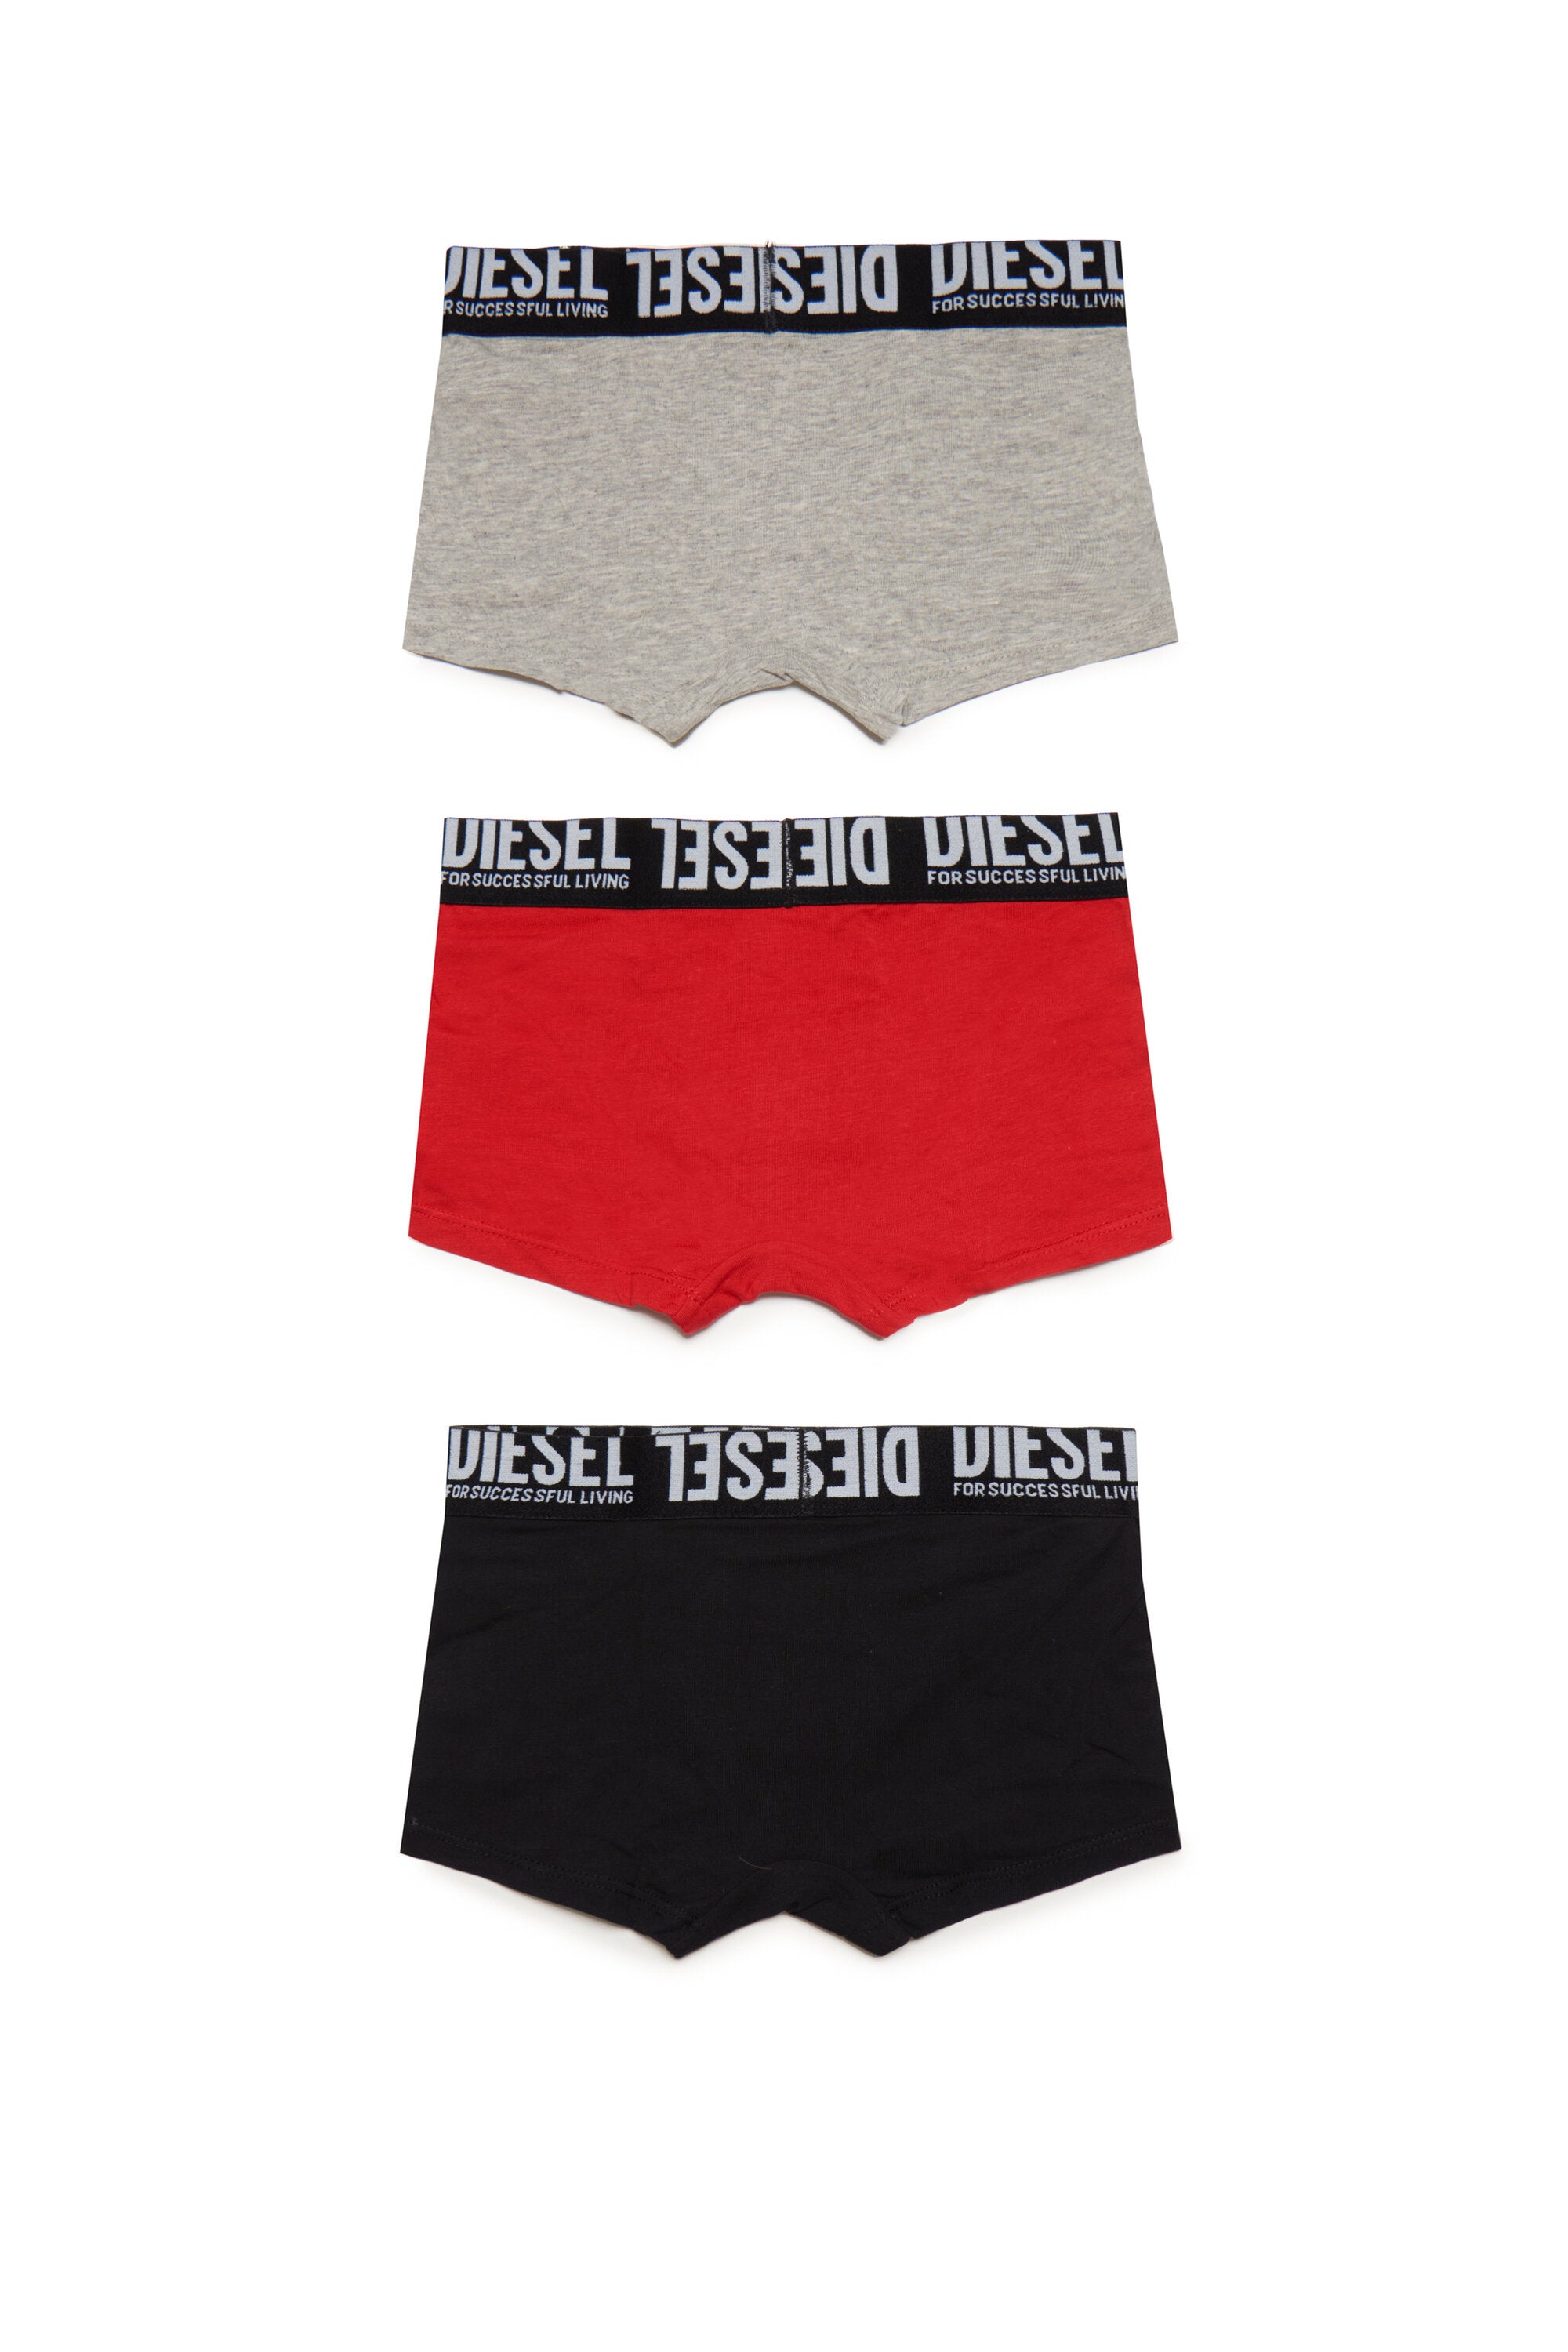 Set of 3 pairs of boxer shorts in various colors in stretch jersey with logoed elastic